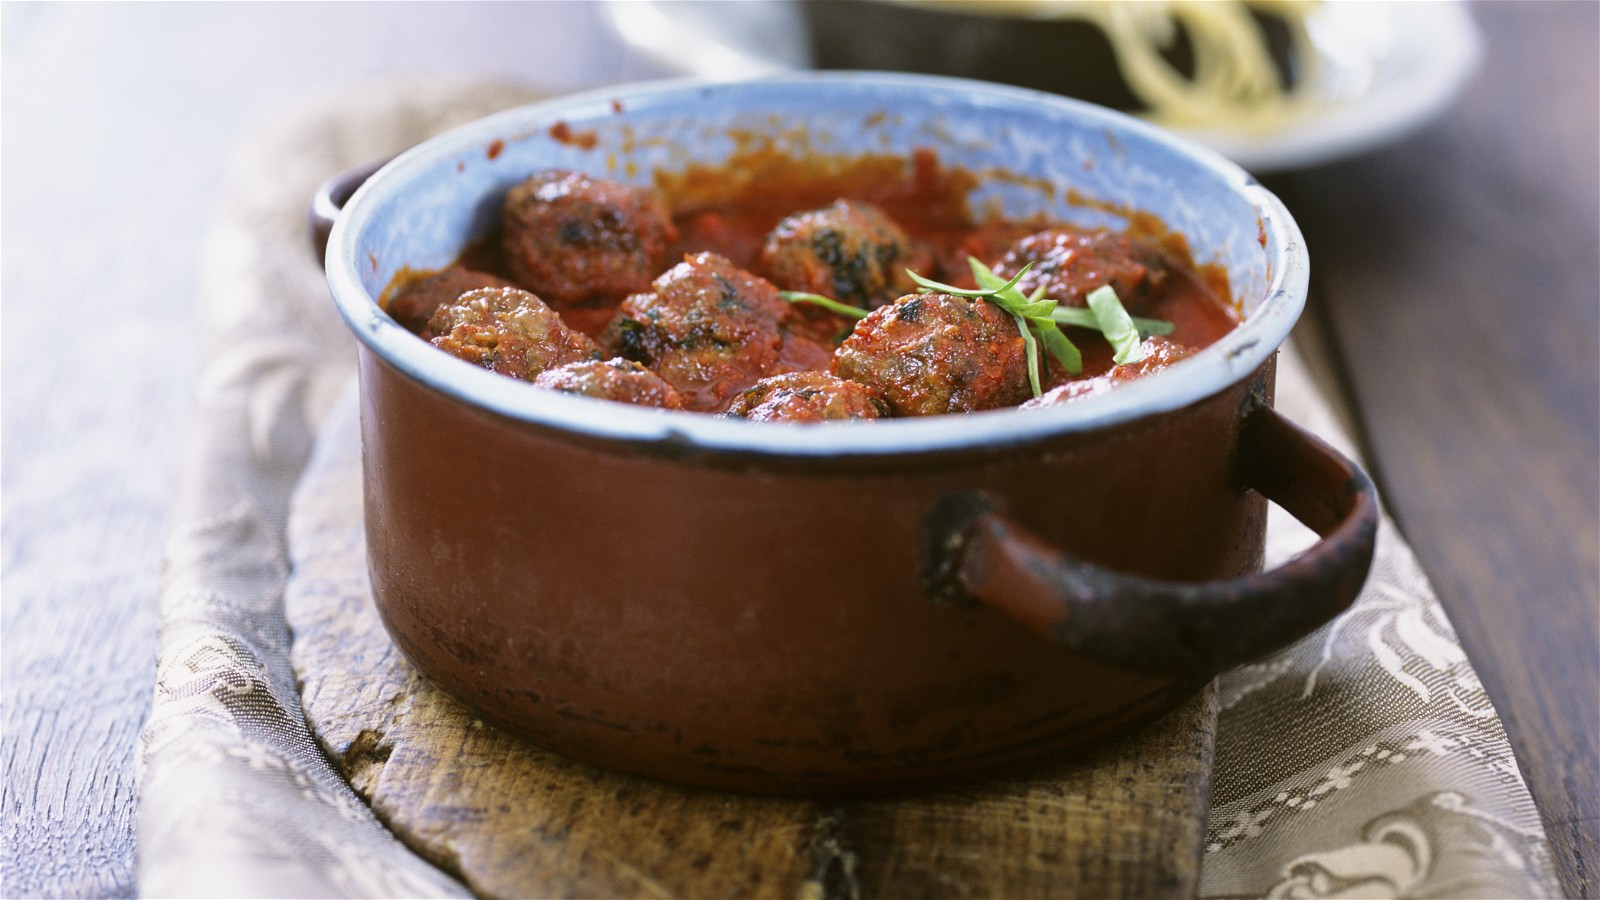 Image of Classic Meatballs with Tomato Sauce